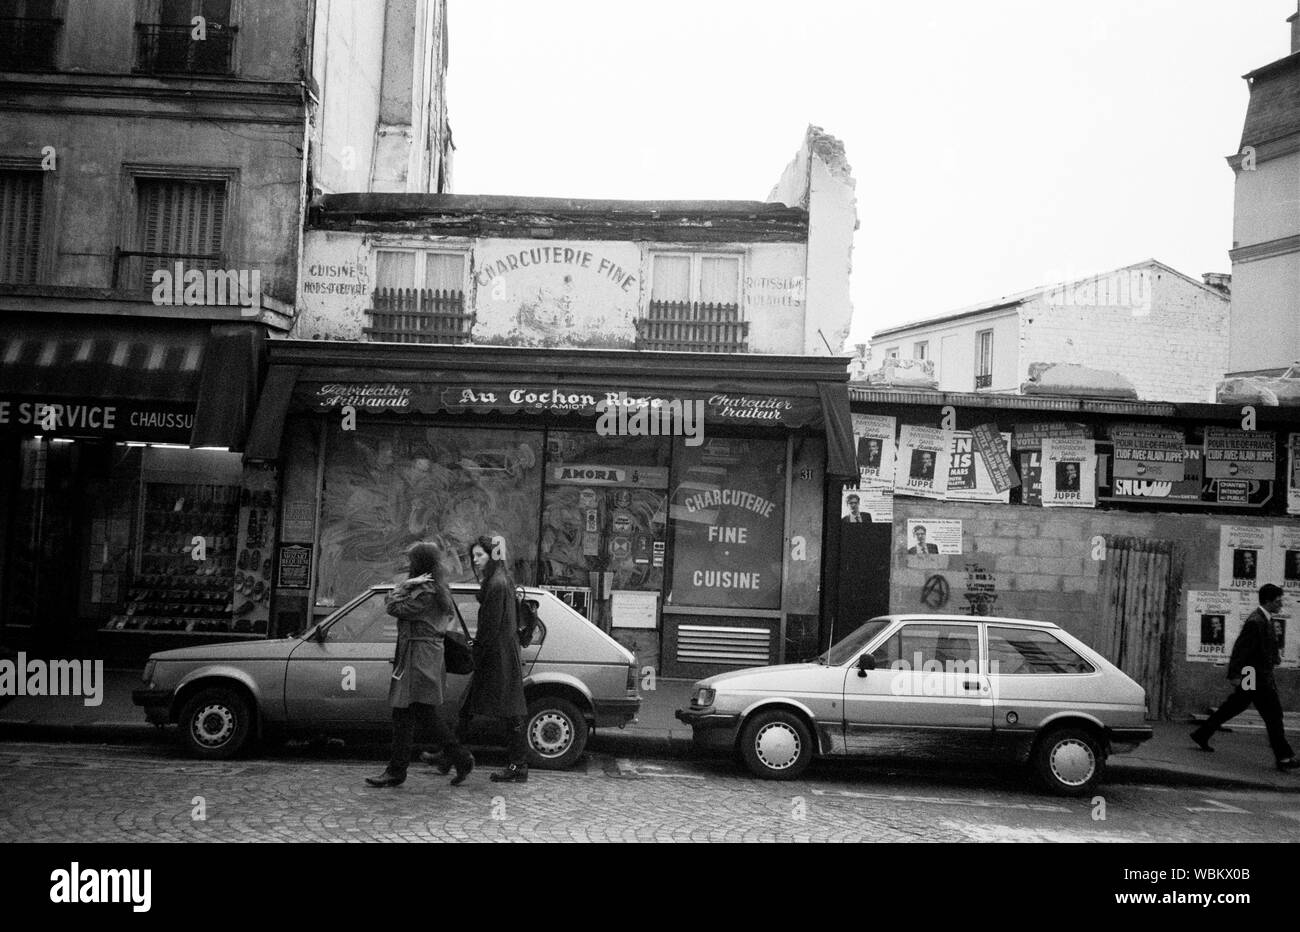 PARIS MONTMARTRE - 'THE PINK PIG' - OLD BUILDINGS UNDER DEMOLITION PROSPECT IN THE AREA OF PLACE DES ABBESSES PARIS MONTMARTRE IN THE LATE 80'S - PARIS STREET PHOTOGRAPHY - SILVER FILM © Frédéric BEAUMONT Stock Photo